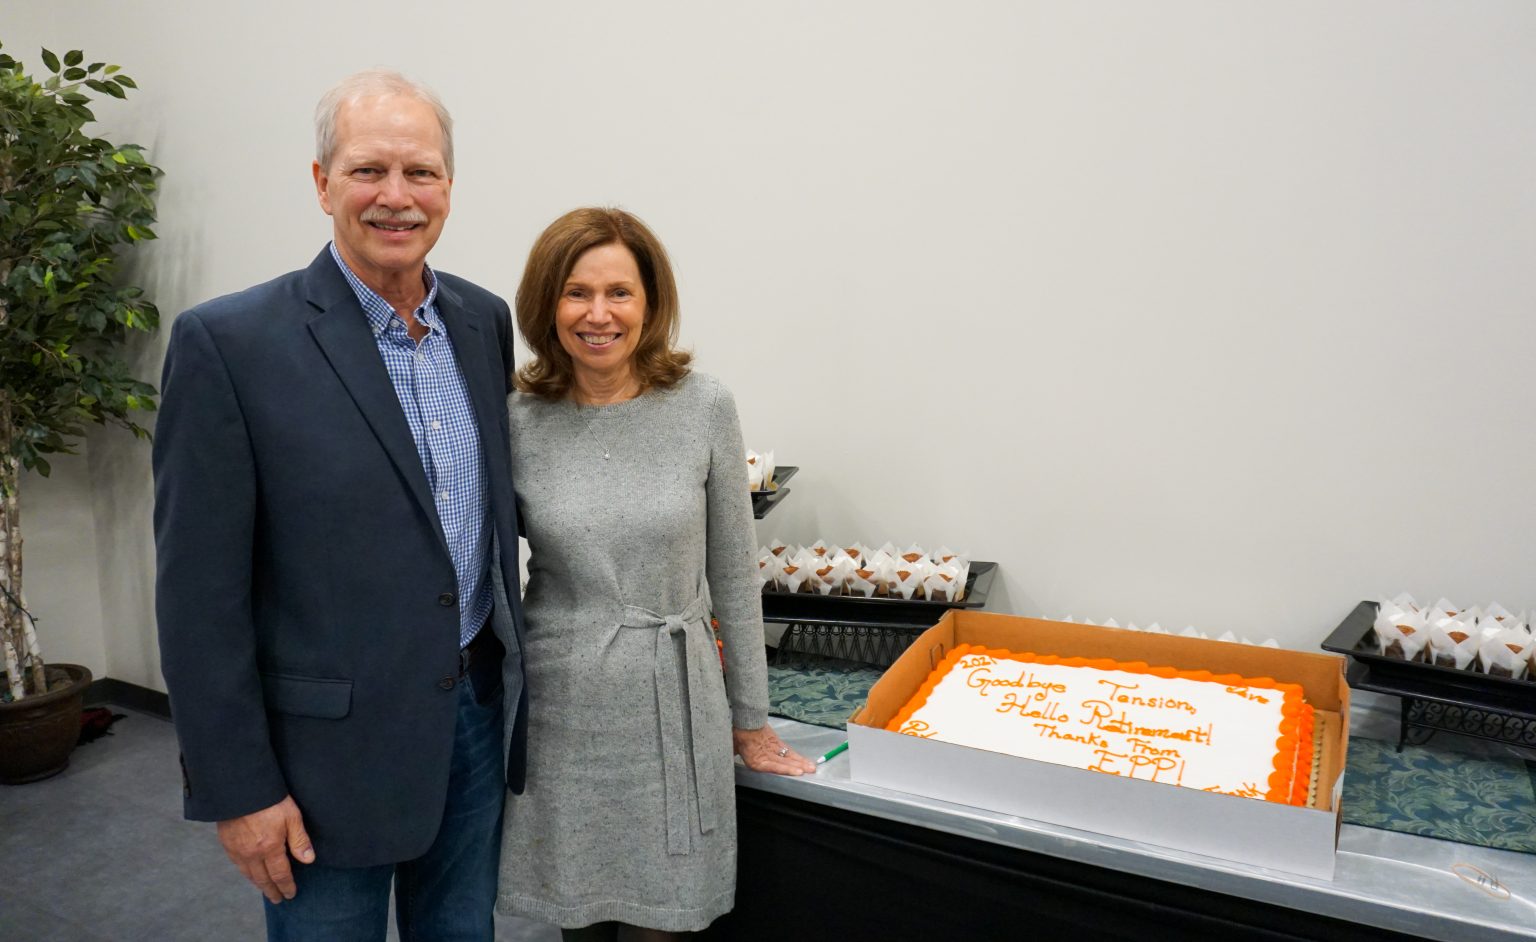 Frank Hale and his wife standing beside a cake.